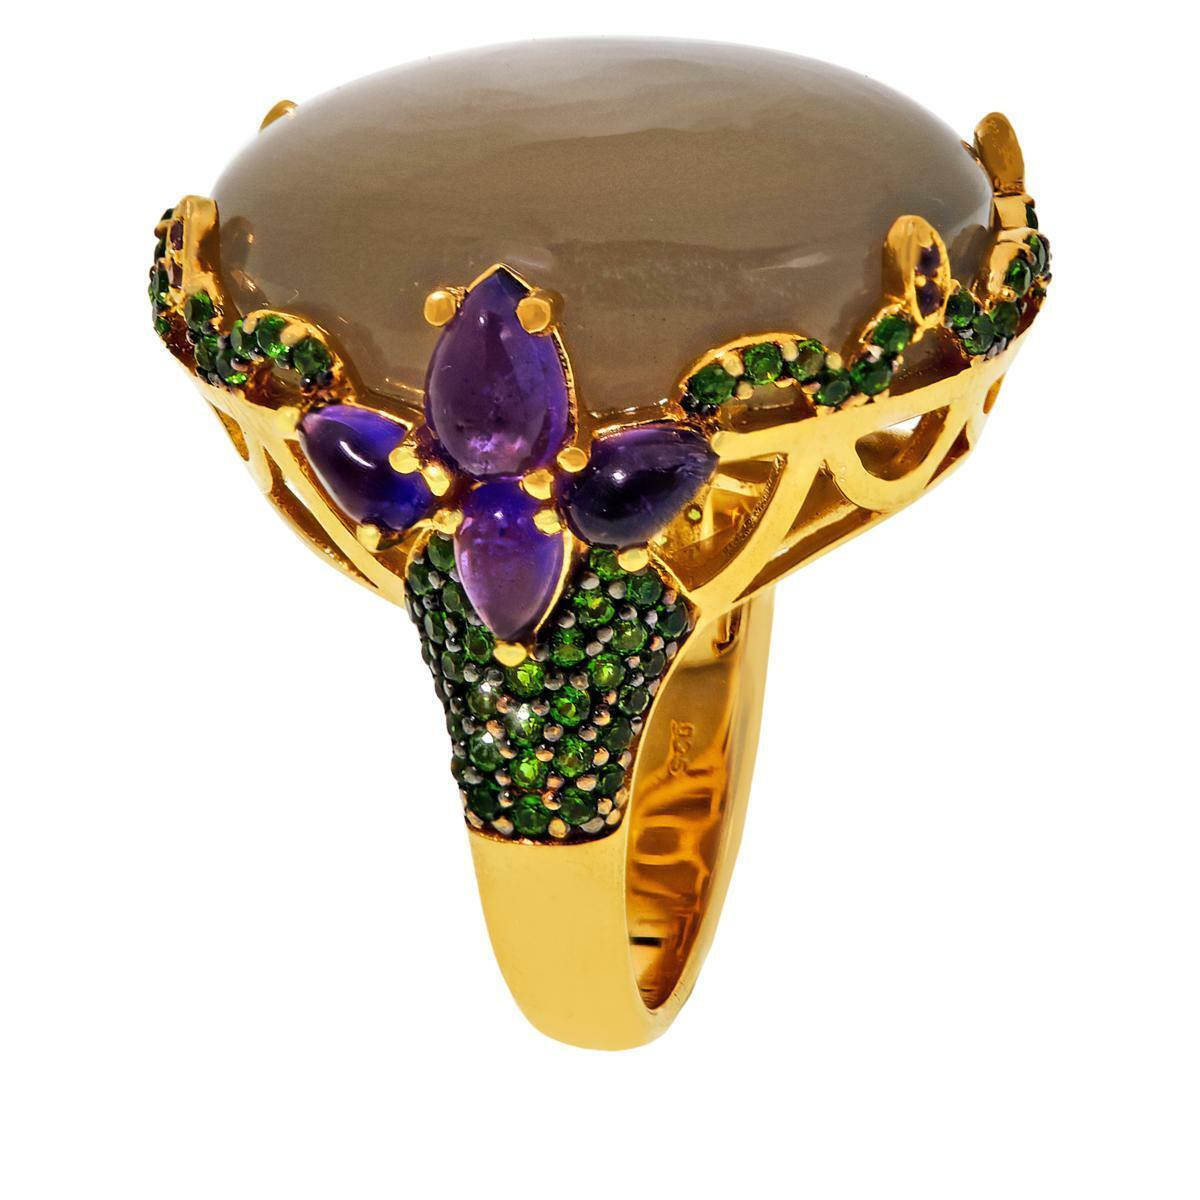 Colleen Lopez Gold-Plated Moonstone, Chrome Diopside and Amethyst Ring, Size 11